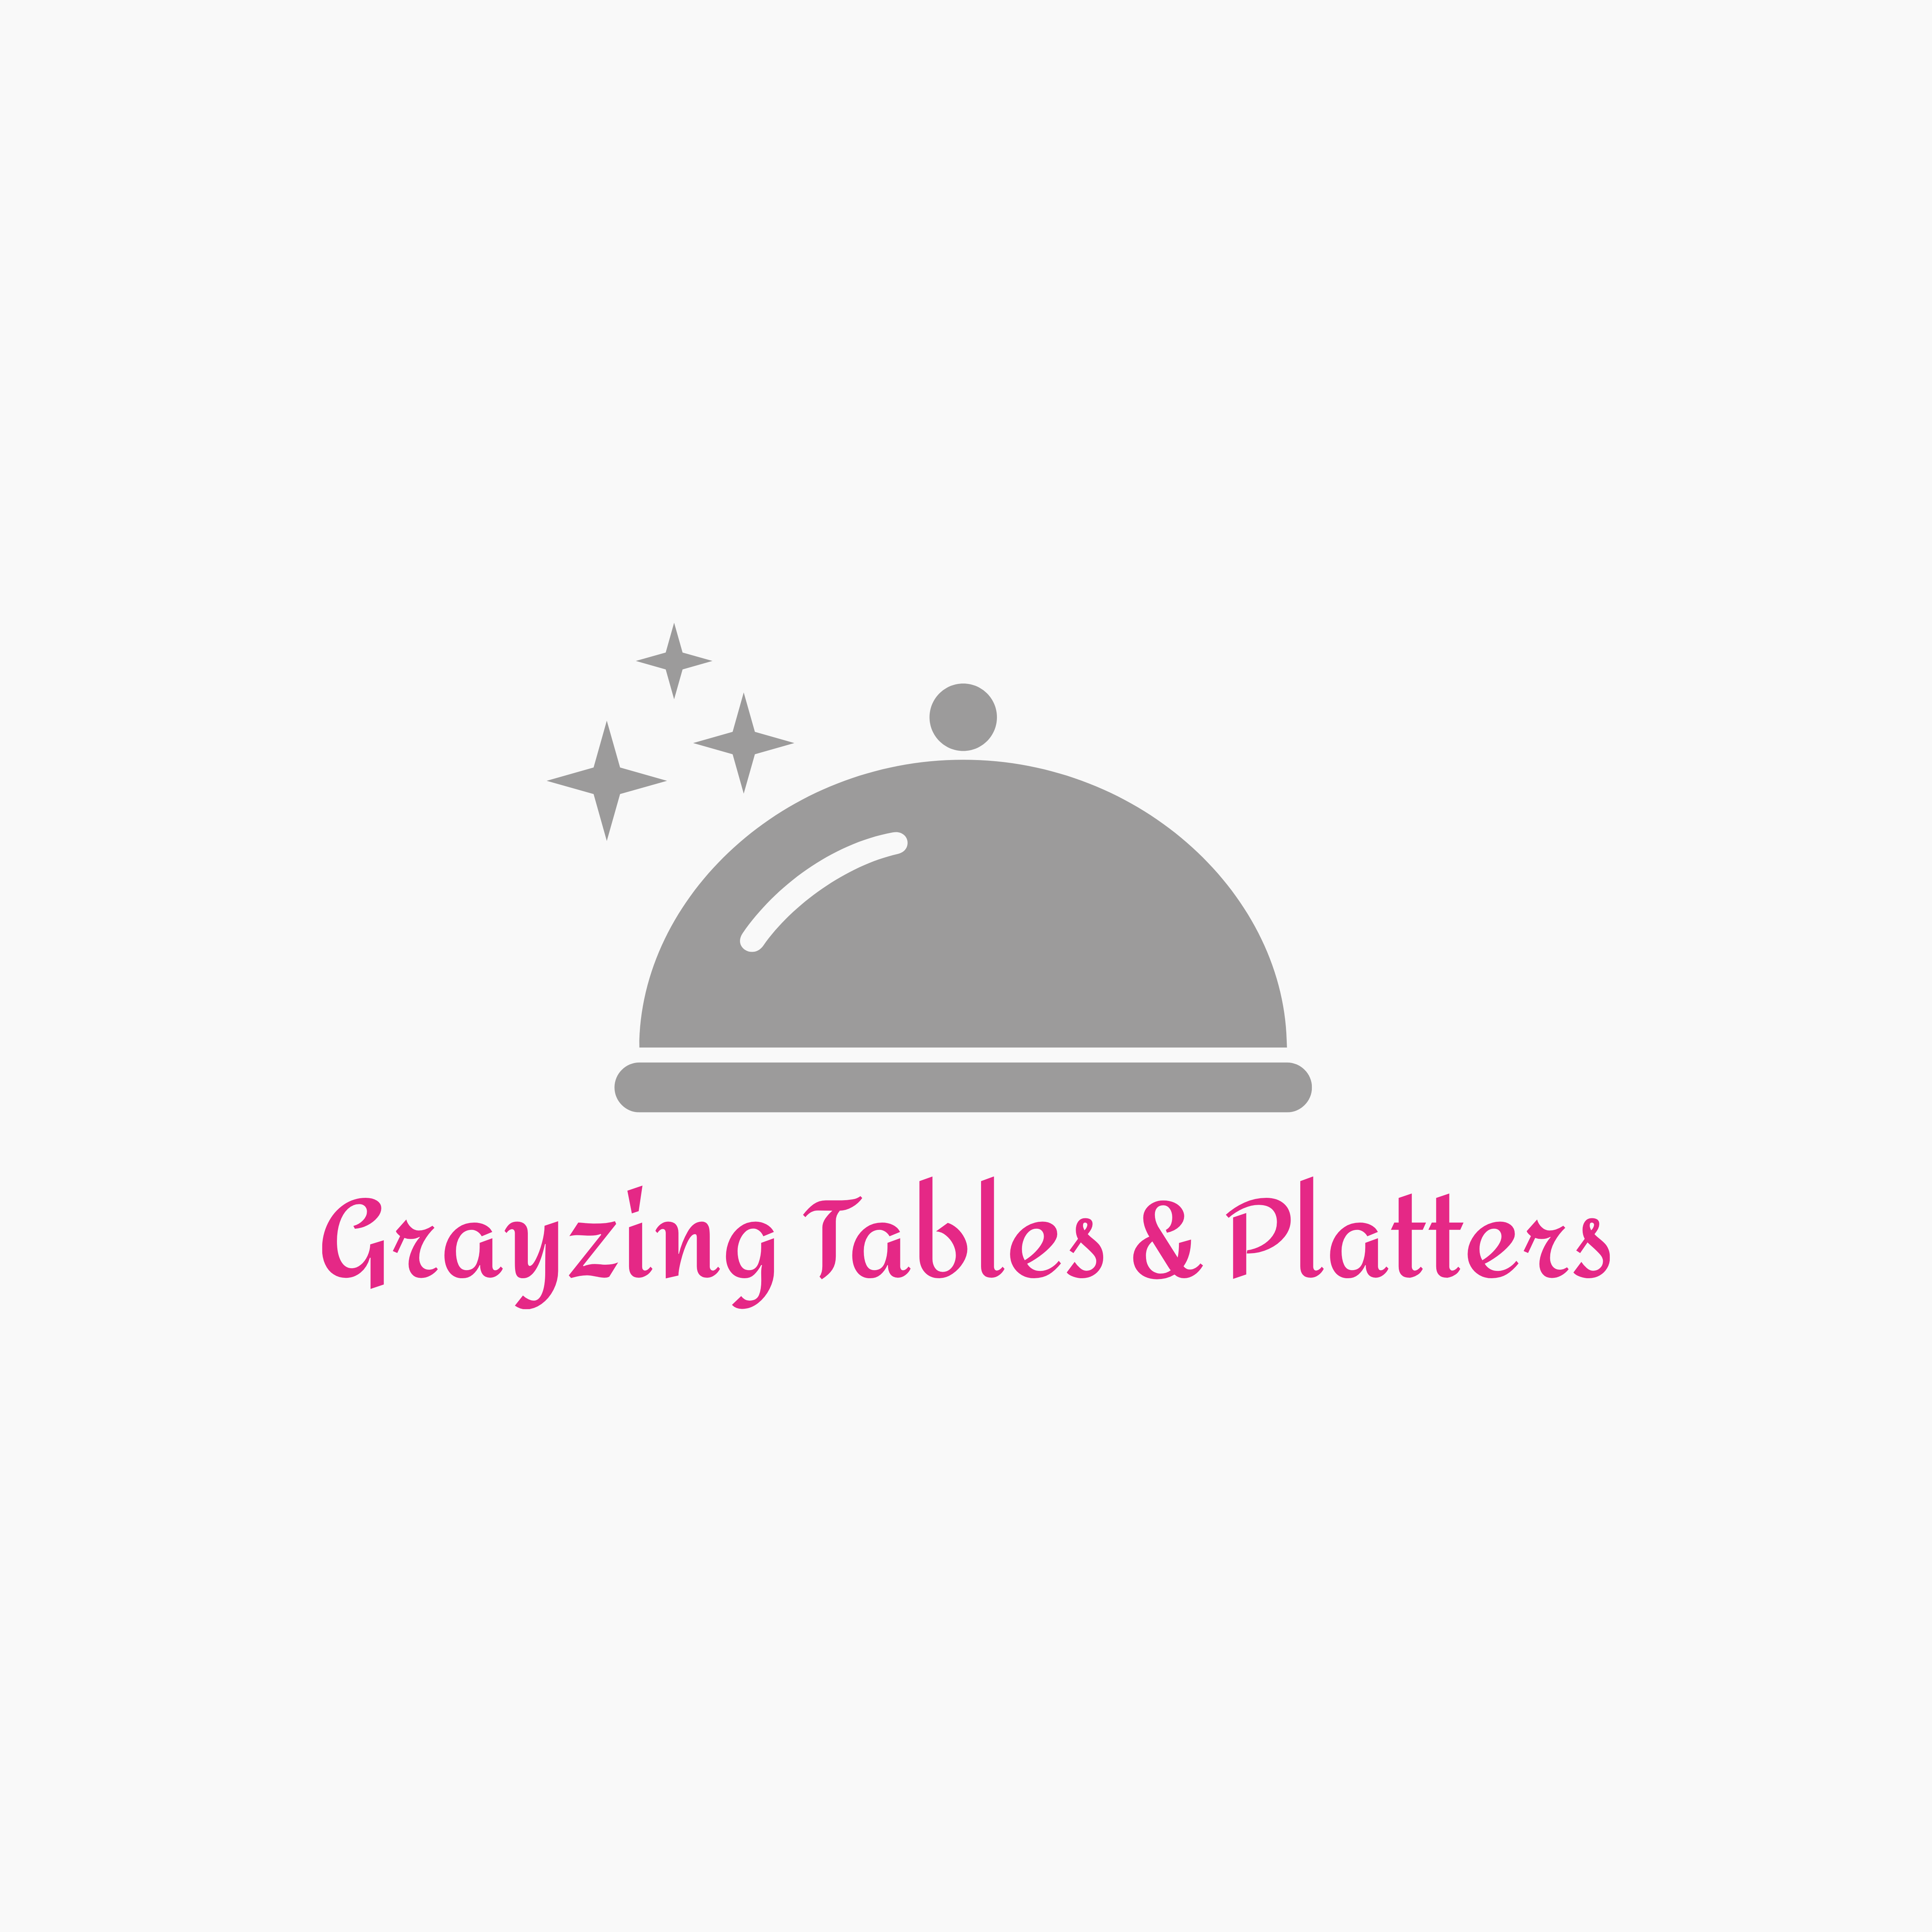 Grayzing Tables & Platters